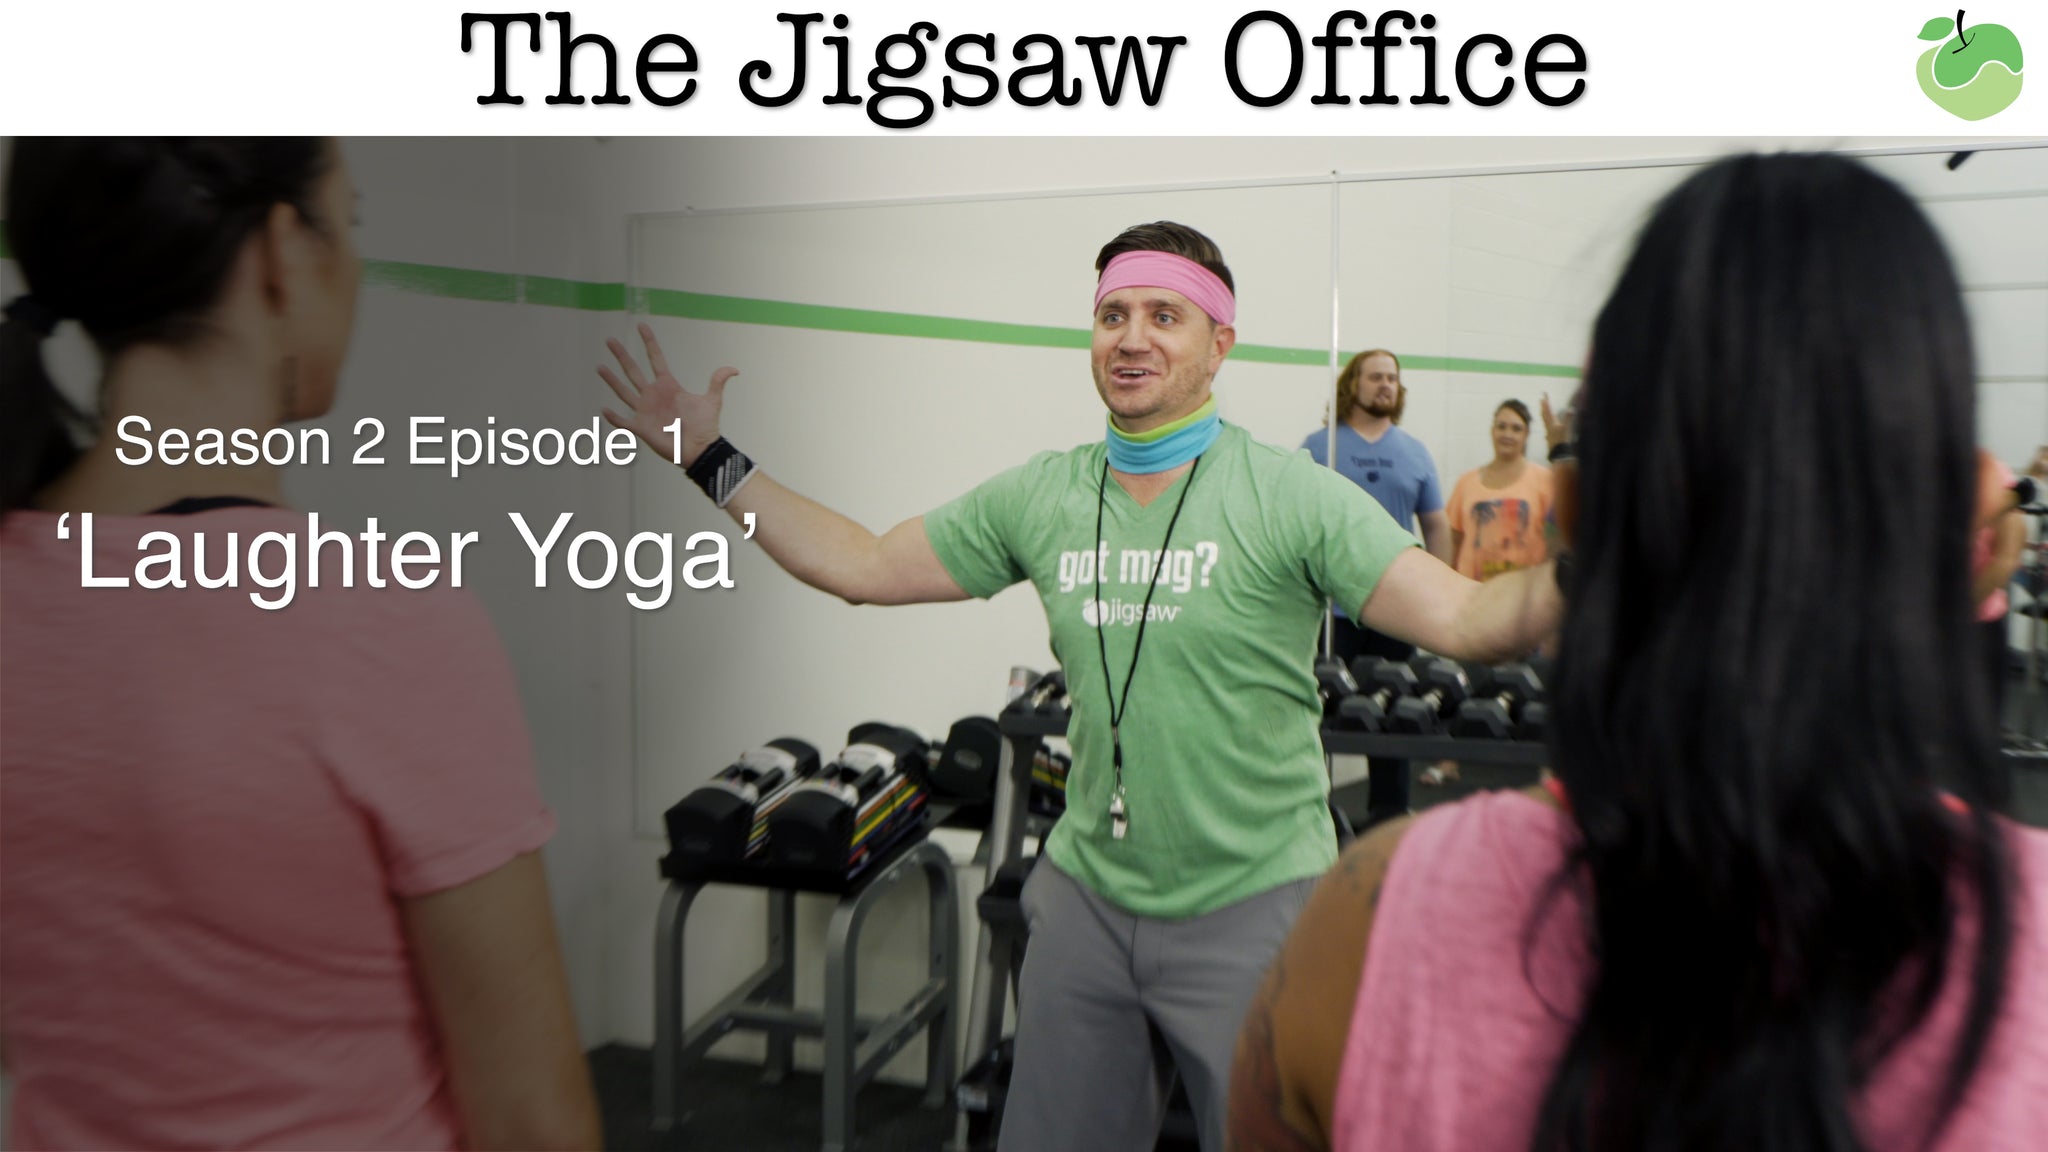 The Jigsaw Office Season 2 Episode 1: 'Laughter Yoga' | #FunnyFriday